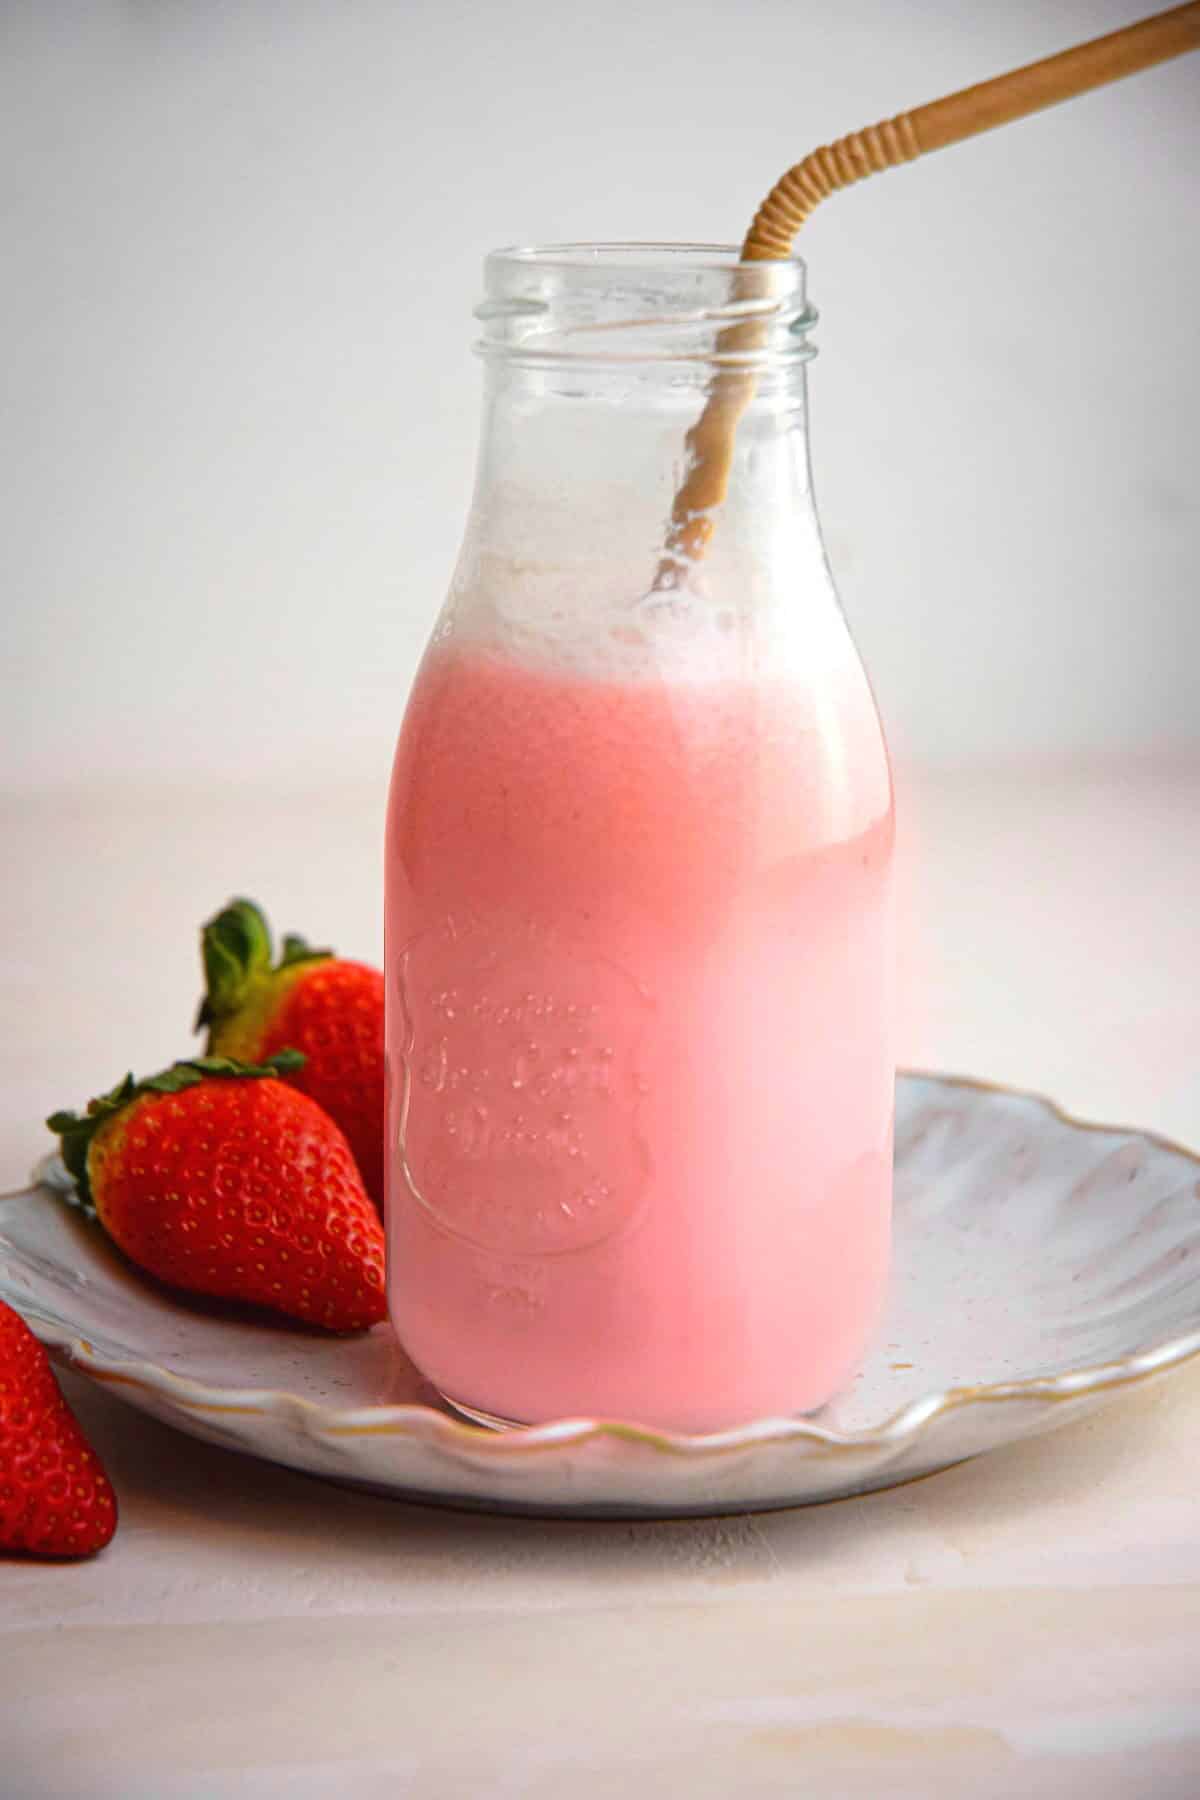 Strawberry milk in a jar with a straw on a plate, fresh strawberries on the side.